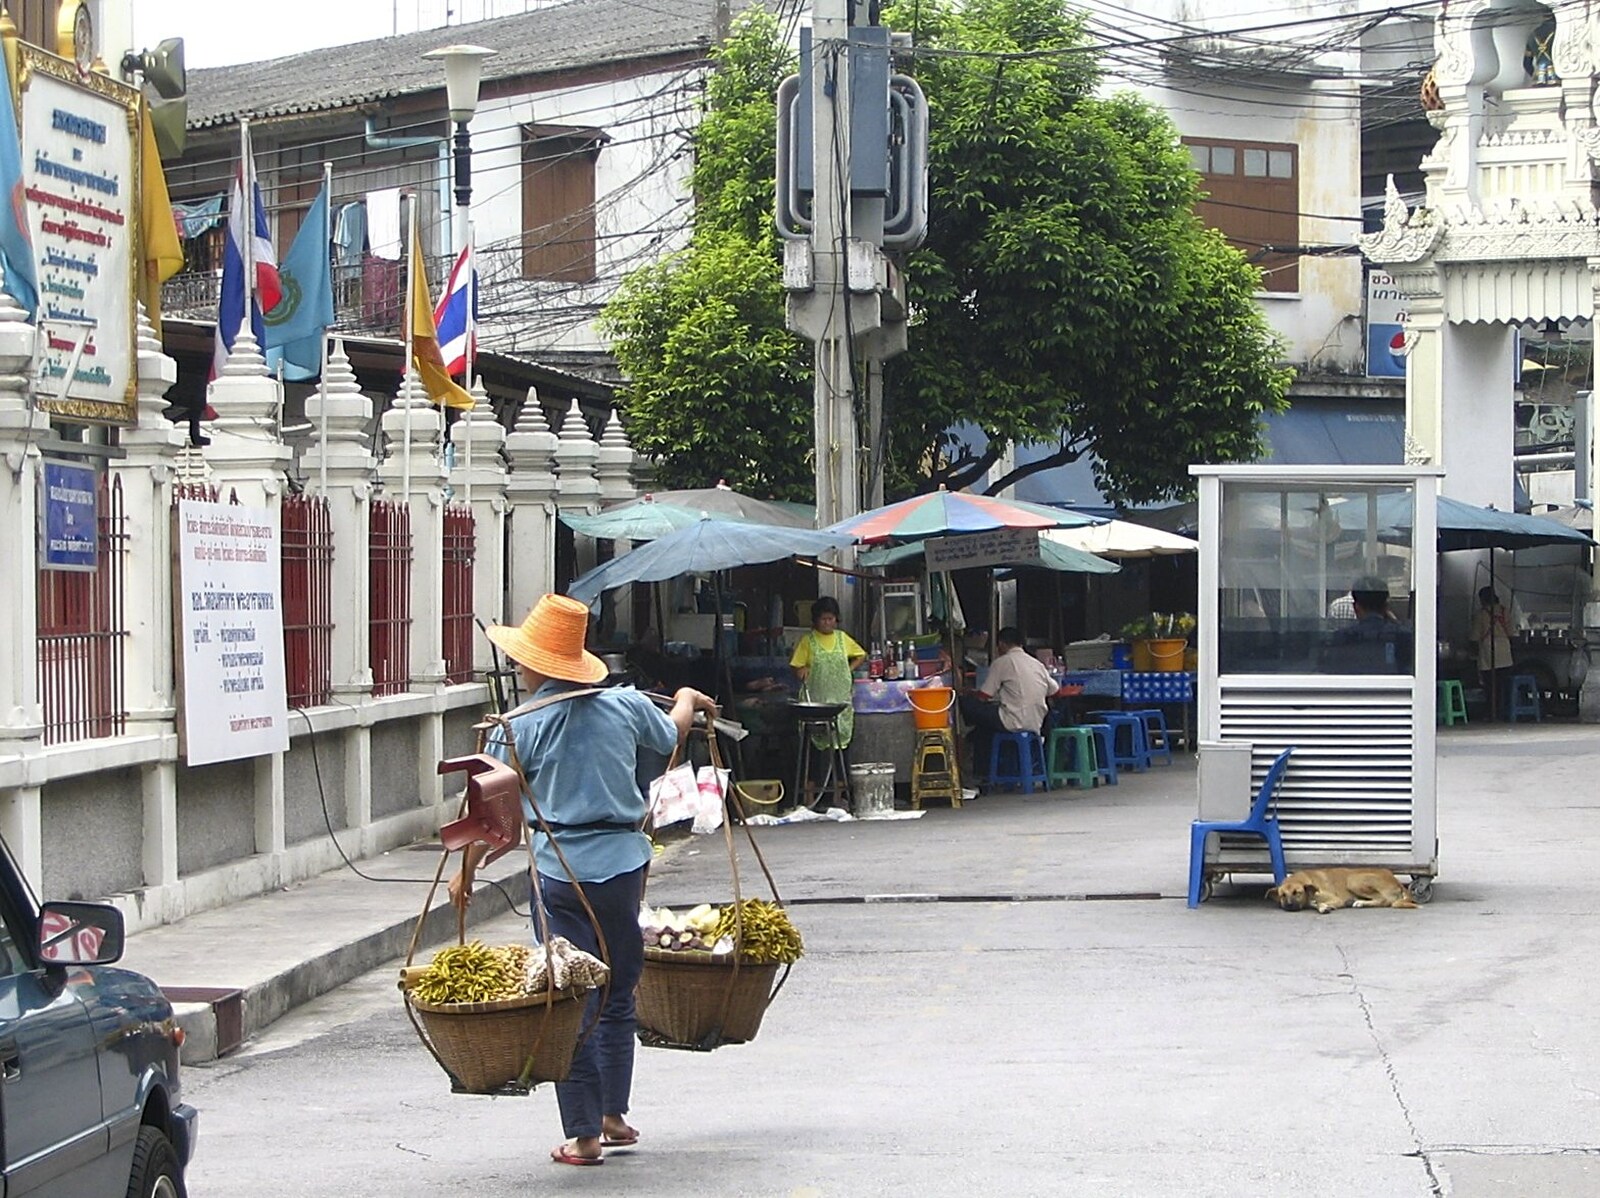 A woman with baskets of fruit roams around from A Working Trip to Bangkok, Thailand - 2nd October 2004